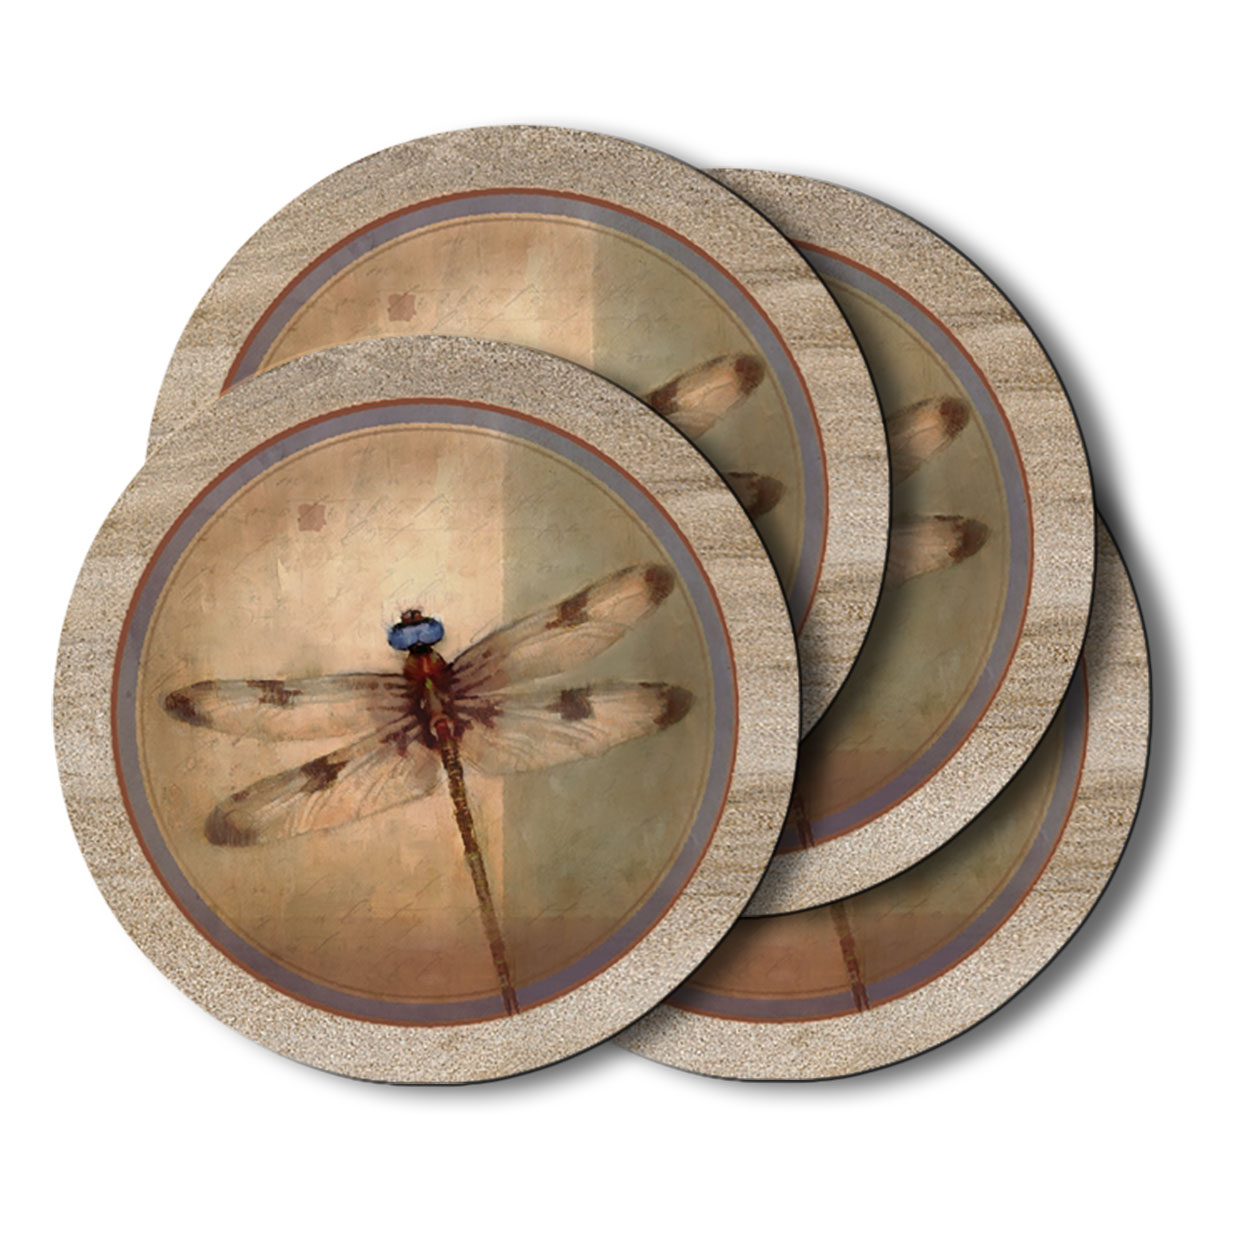 Thirstystone Dragonfly TS2129 - Set of 4 Round Sandstone Coasters